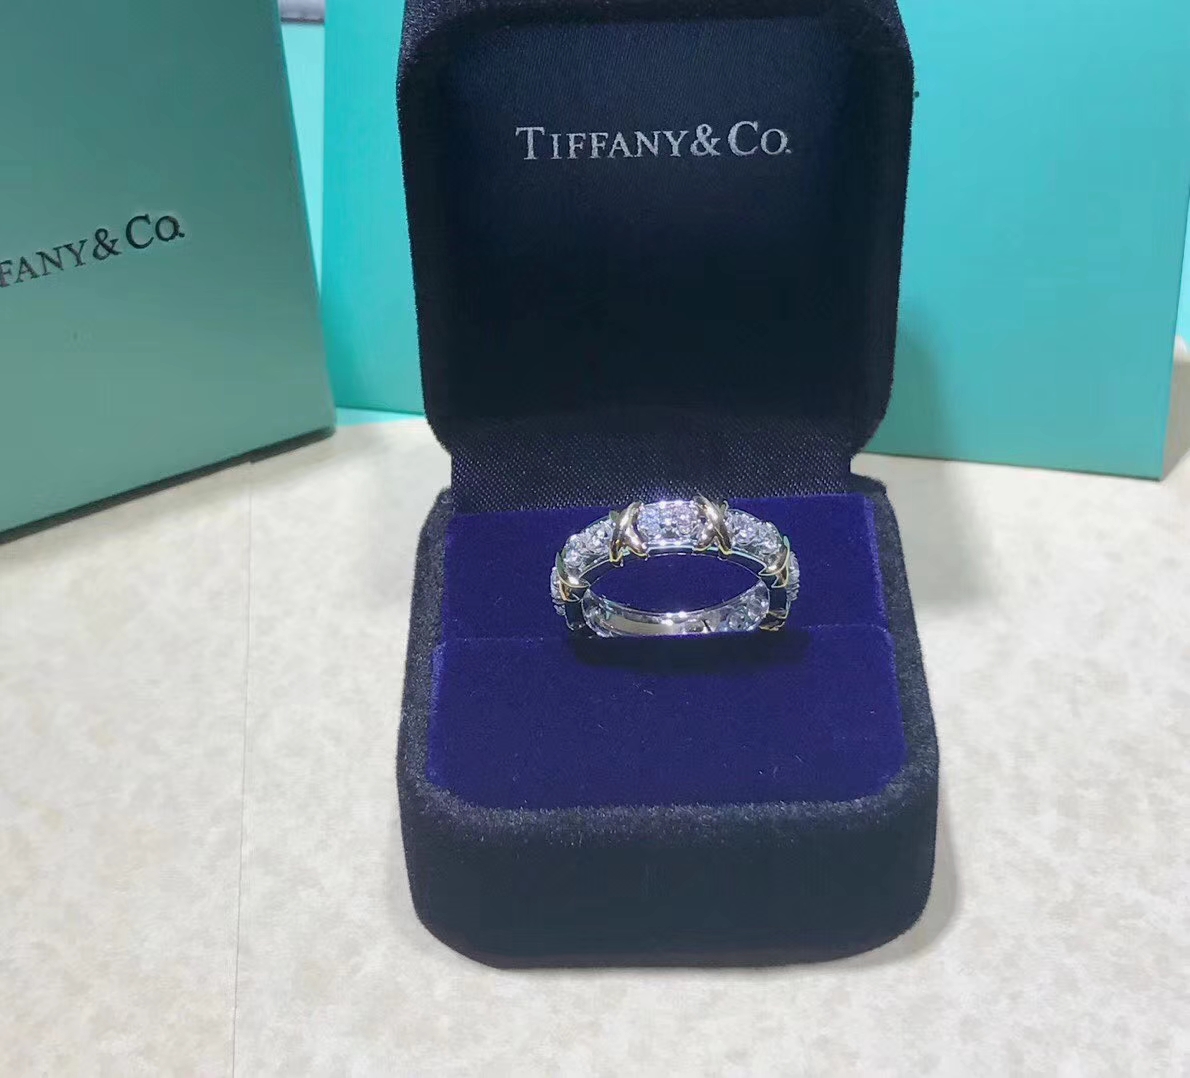 Tiffany & Co. Schlumberger Sixteen Stone Diamond Ring in 18kt Yellow Gold and Platinum